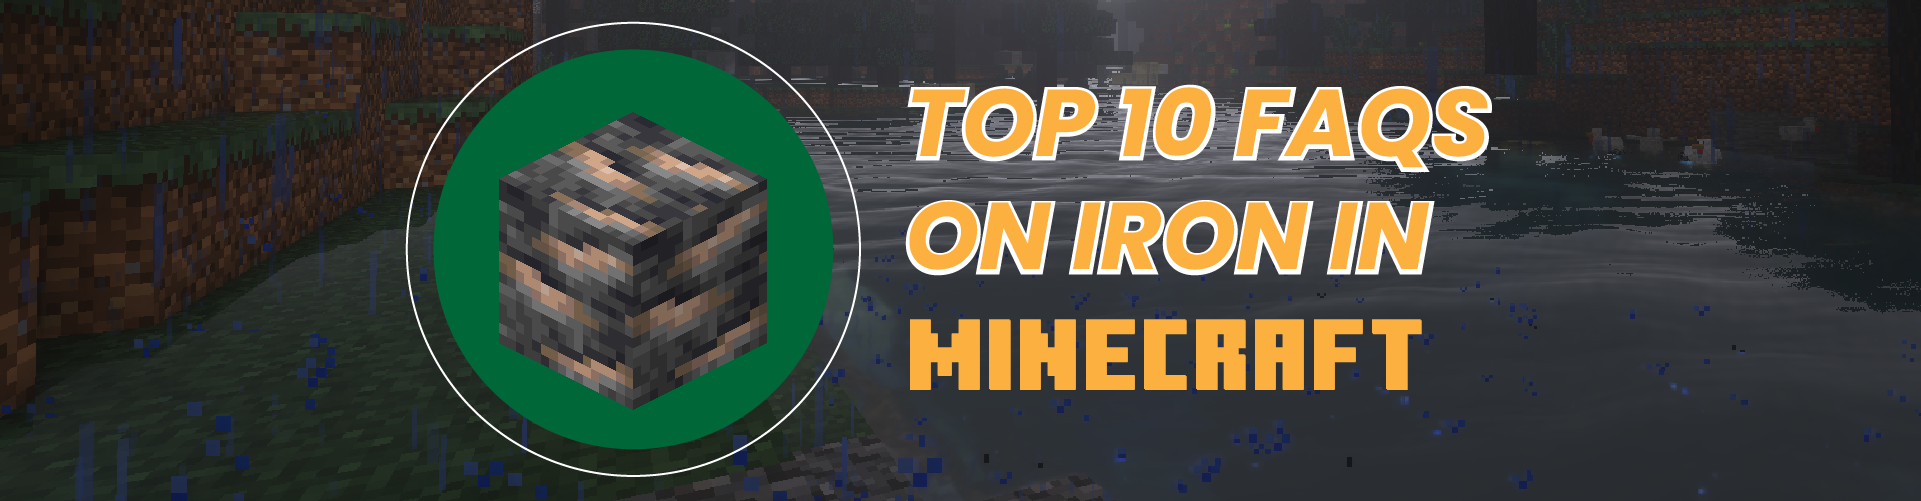 Top 10 FAQs On Iron In Minecraft